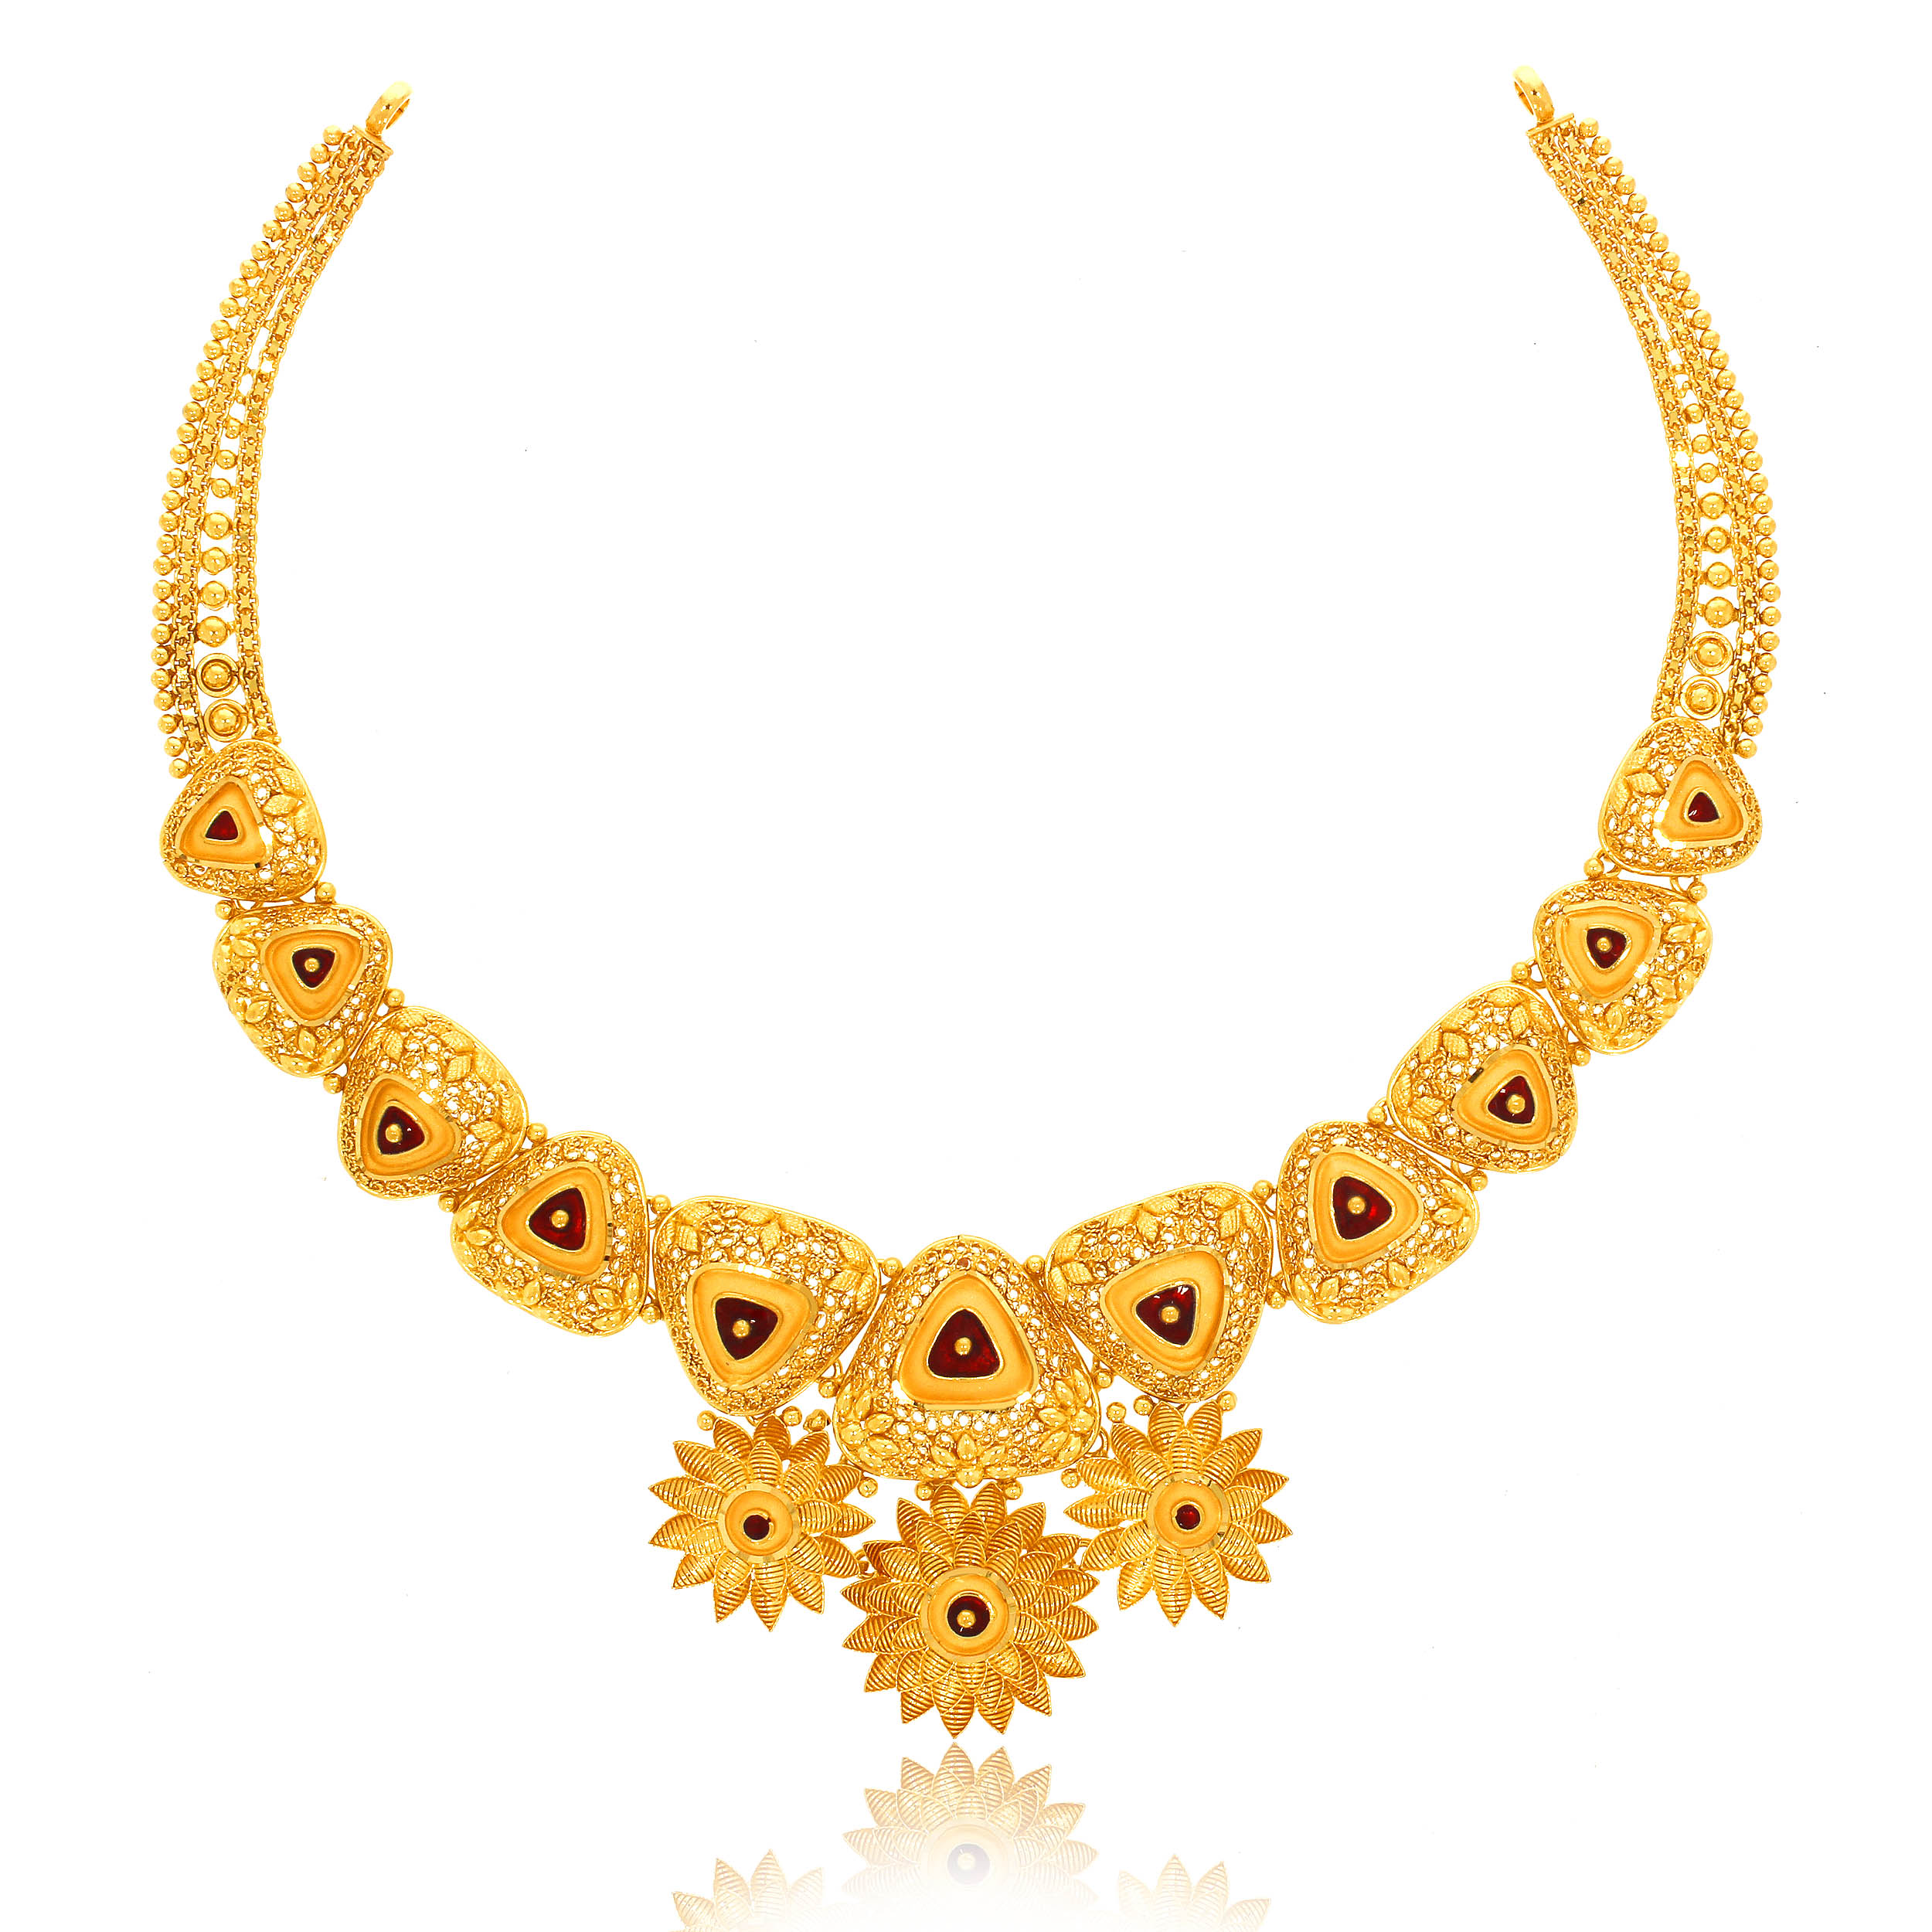 SENA AABI JEWELS 22CT BIS HALLMARK GOLD  NECKLACE FOR WOMAN